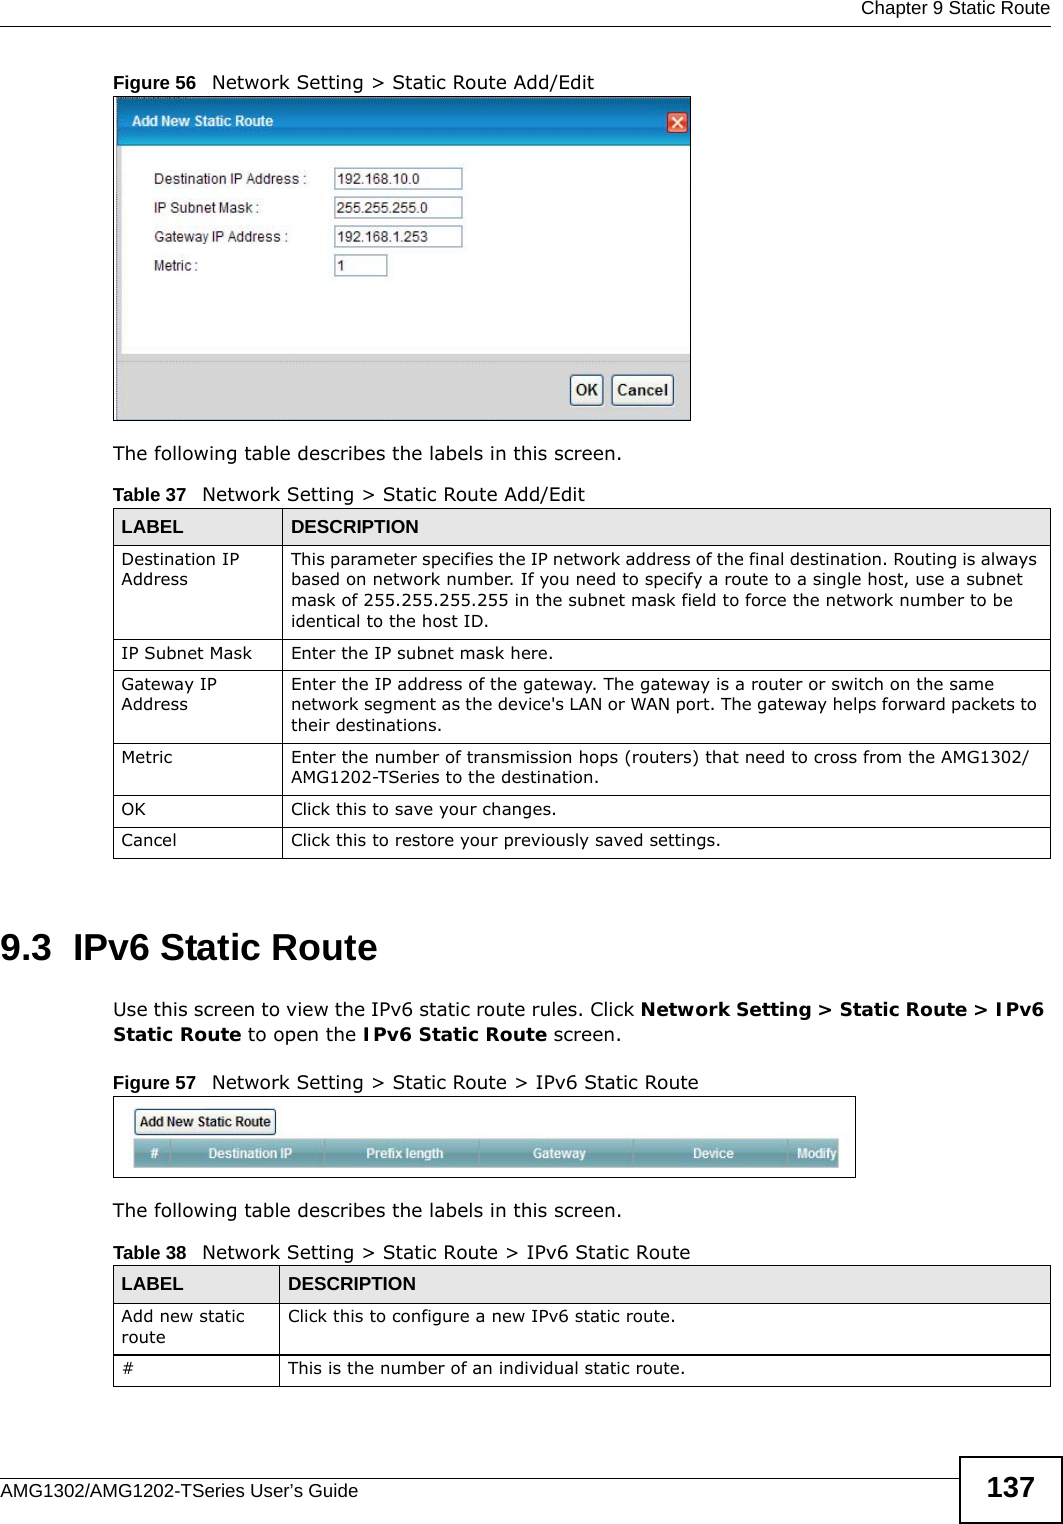  Chapter 9 Static RouteAMG1302/AMG1202-TSeries User’s Guide 137Figure 56   Network Setting &gt; Static Route Add/EditThe following table describes the labels in this screen. 9.3  IPv6 Static RouteUse this screen to view the IPv6 static route rules. Click Network Setting &gt; Static Route &gt; IPv6 Static Route to open the IPv6 Static Route screen.Figure 57   Network Setting &gt; Static Route &gt; IPv6 Static RouteThe following table describes the labels in this screen. Table 37   Network Setting &gt; Static Route Add/EditLABEL DESCRIPTIONDestination IP AddressThis parameter specifies the IP network address of the final destination. Routing is always based on network number. If you need to specify a route to a single host, use a subnet mask of 255.255.255.255 in the subnet mask field to force the network number to be identical to the host ID.IP Subnet Mask  Enter the IP subnet mask here.Gateway IP AddressEnter the IP address of the gateway. The gateway is a router or switch on the same network segment as the device&apos;s LAN or WAN port. The gateway helps forward packets to their destinations.Metric Enter the number of transmission hops (routers) that need to cross from the AMG1302/AMG1202-TSeries to the destination.OK Click this to save your changes.Cancel Click this to restore your previously saved settings.Table 38   Network Setting &gt; Static Route &gt; IPv6 Static RouteLABEL DESCRIPTIONAdd new static routeClick this to configure a new IPv6 static route.#This is the number of an individual static route.